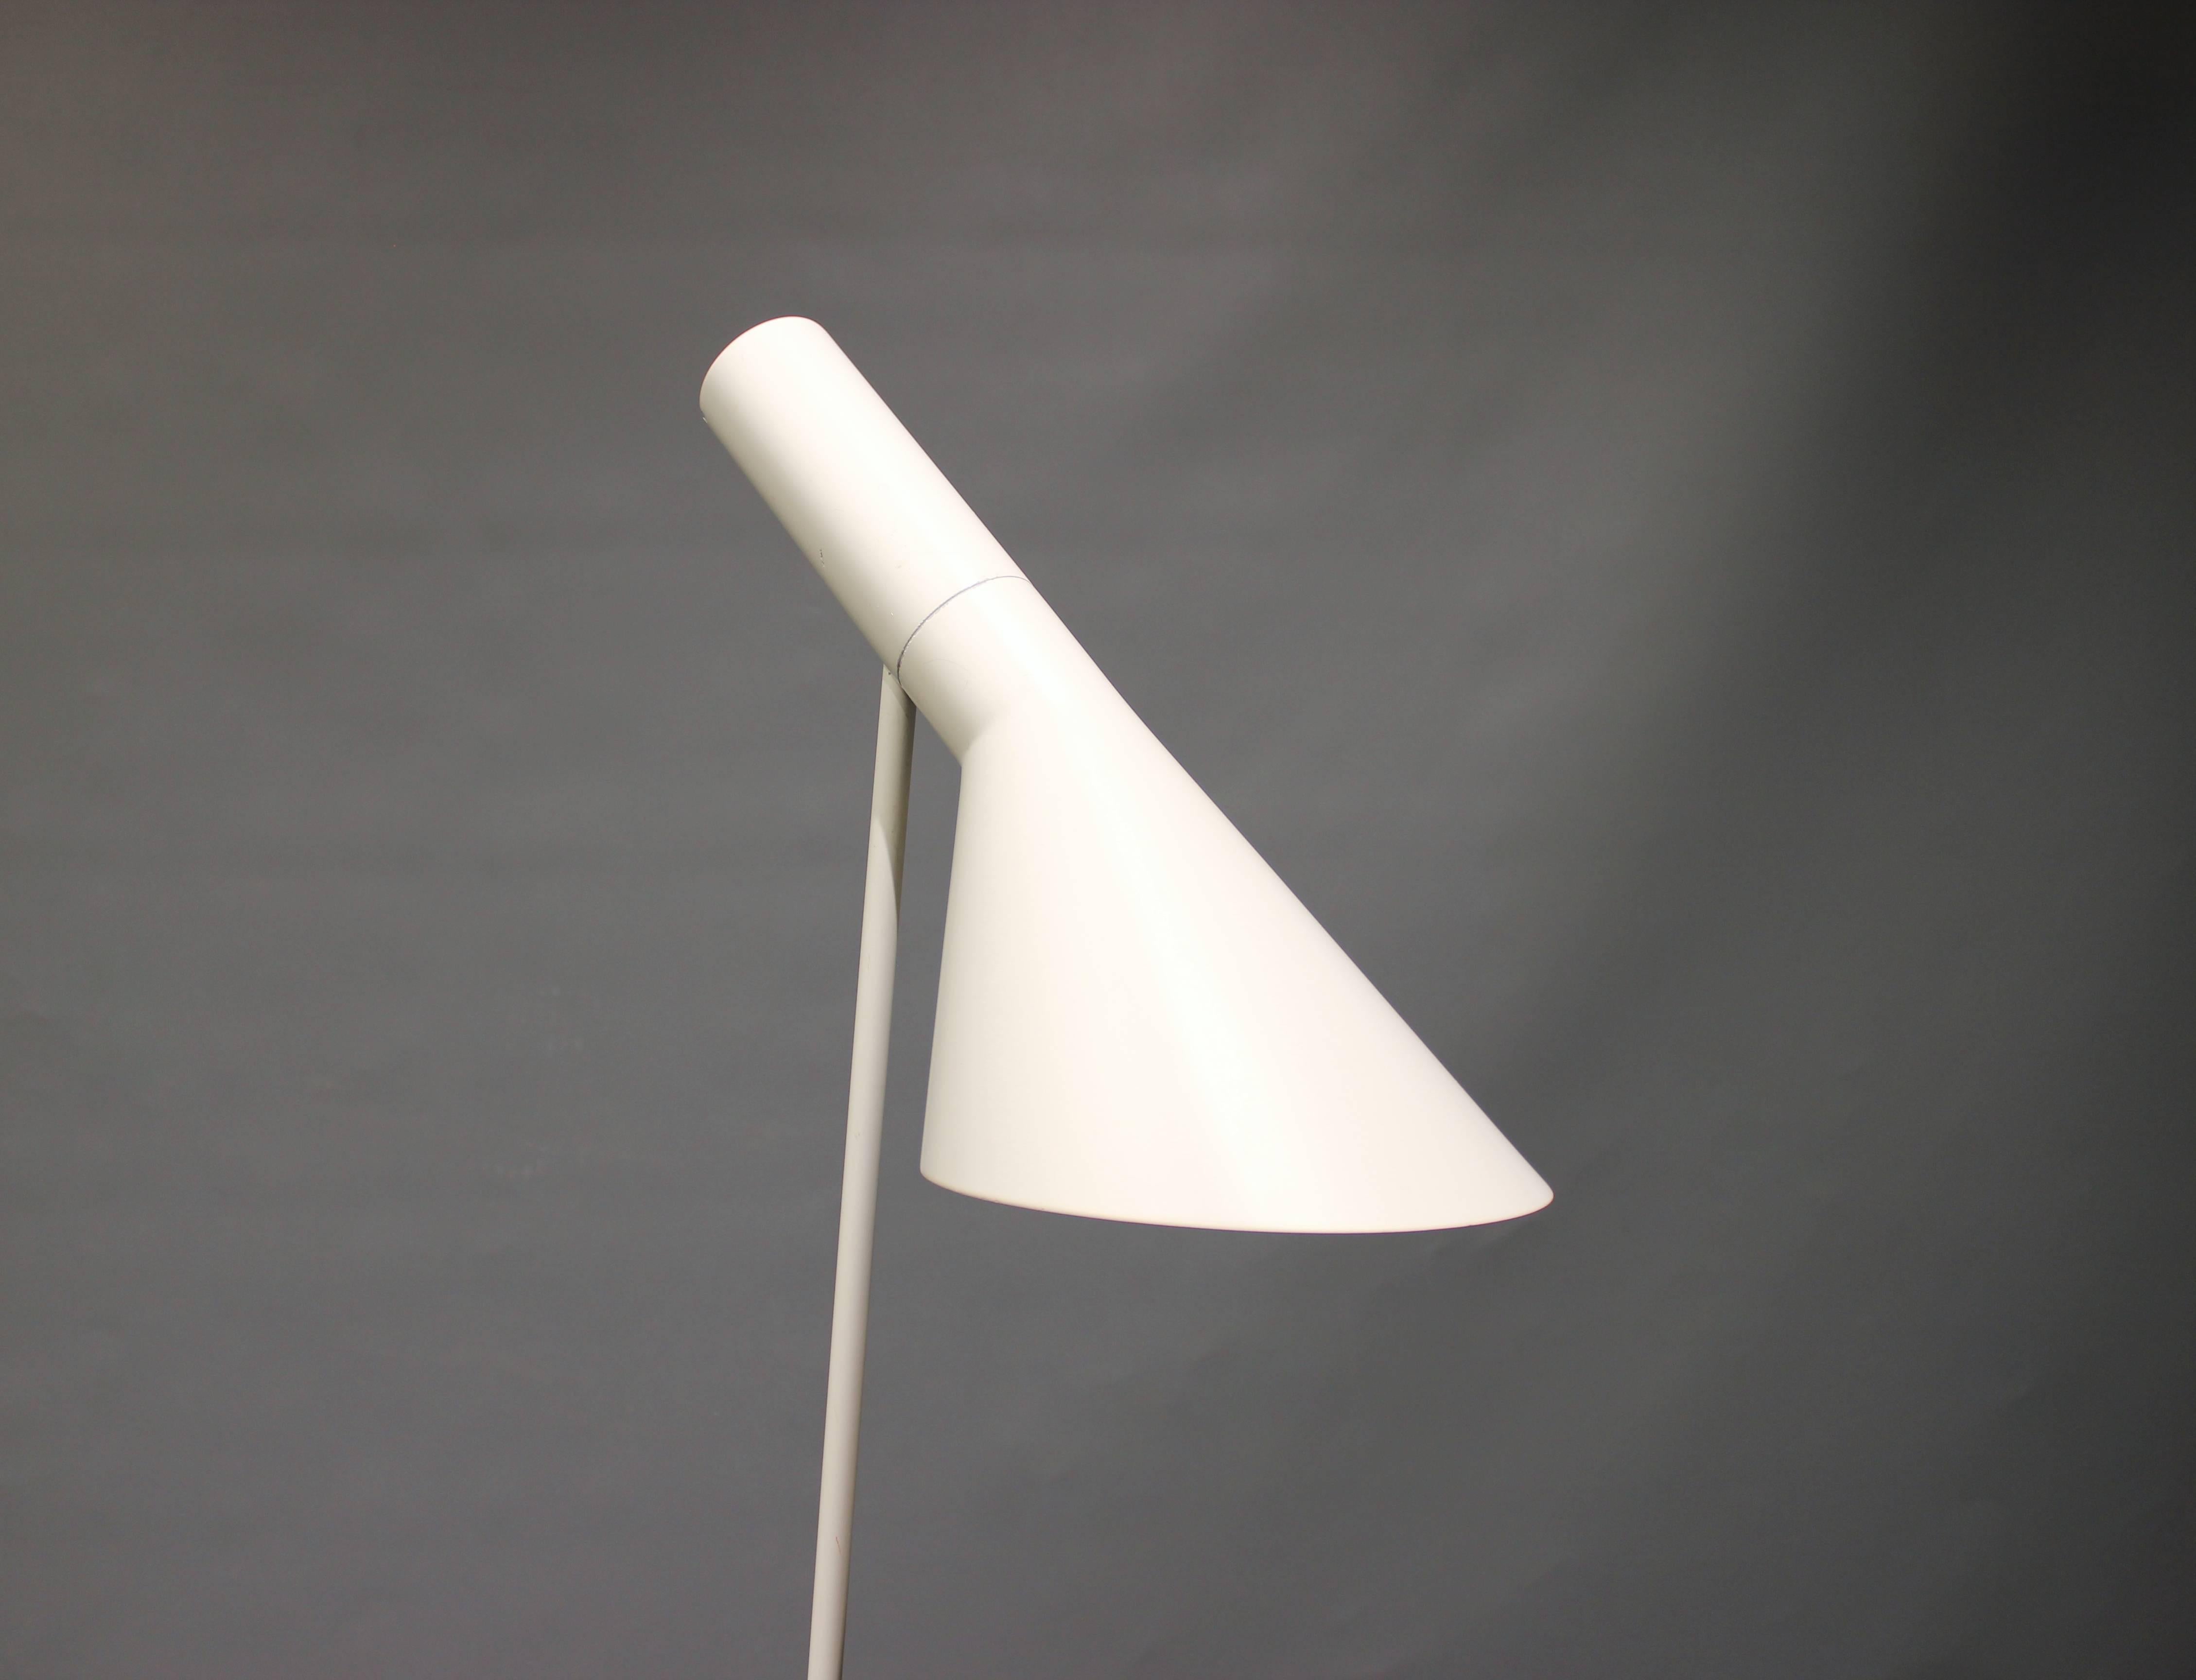 White floor lamp designed by Arne Jacobsen in 1960 and manufactured by Louis Poulsen. The lamp is in great vintage condition.